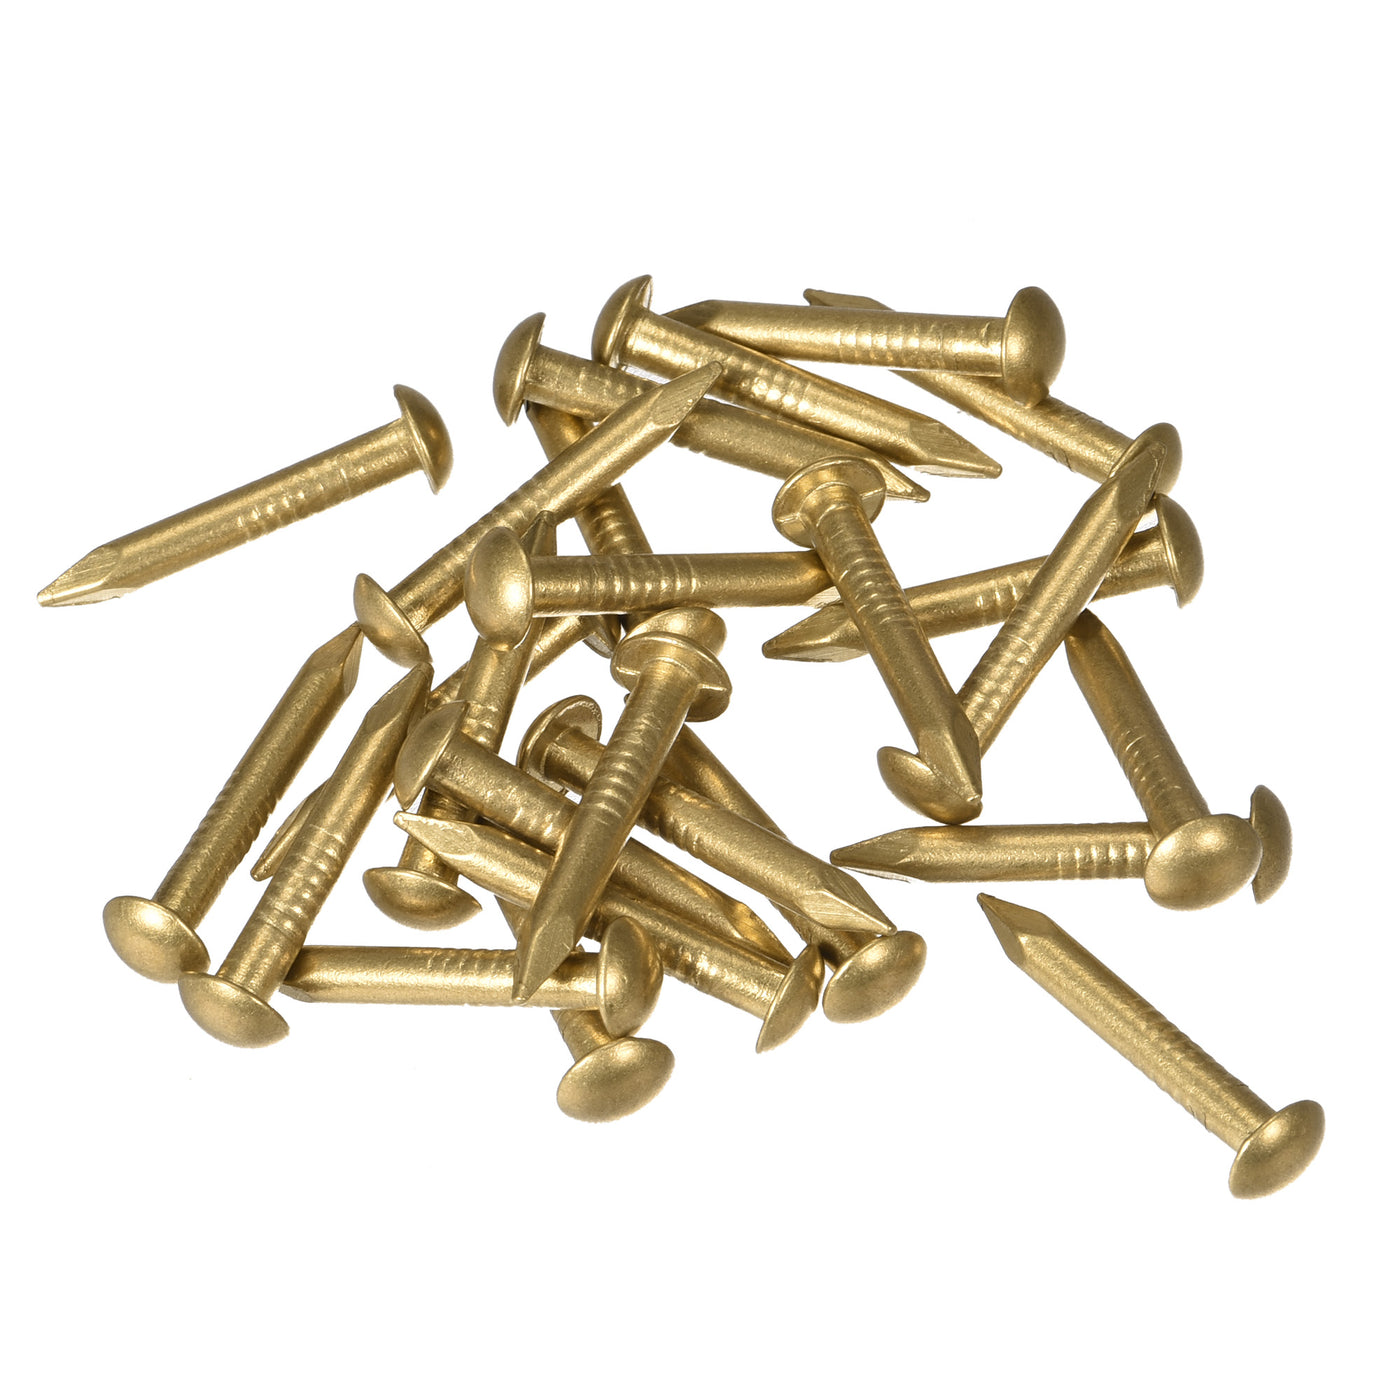 Uxcell Uxcell Small Tiny Brass Nails 2.8x25mm for DIY Decorative Pictures Wooden Boxes Household Accessories 25pcs